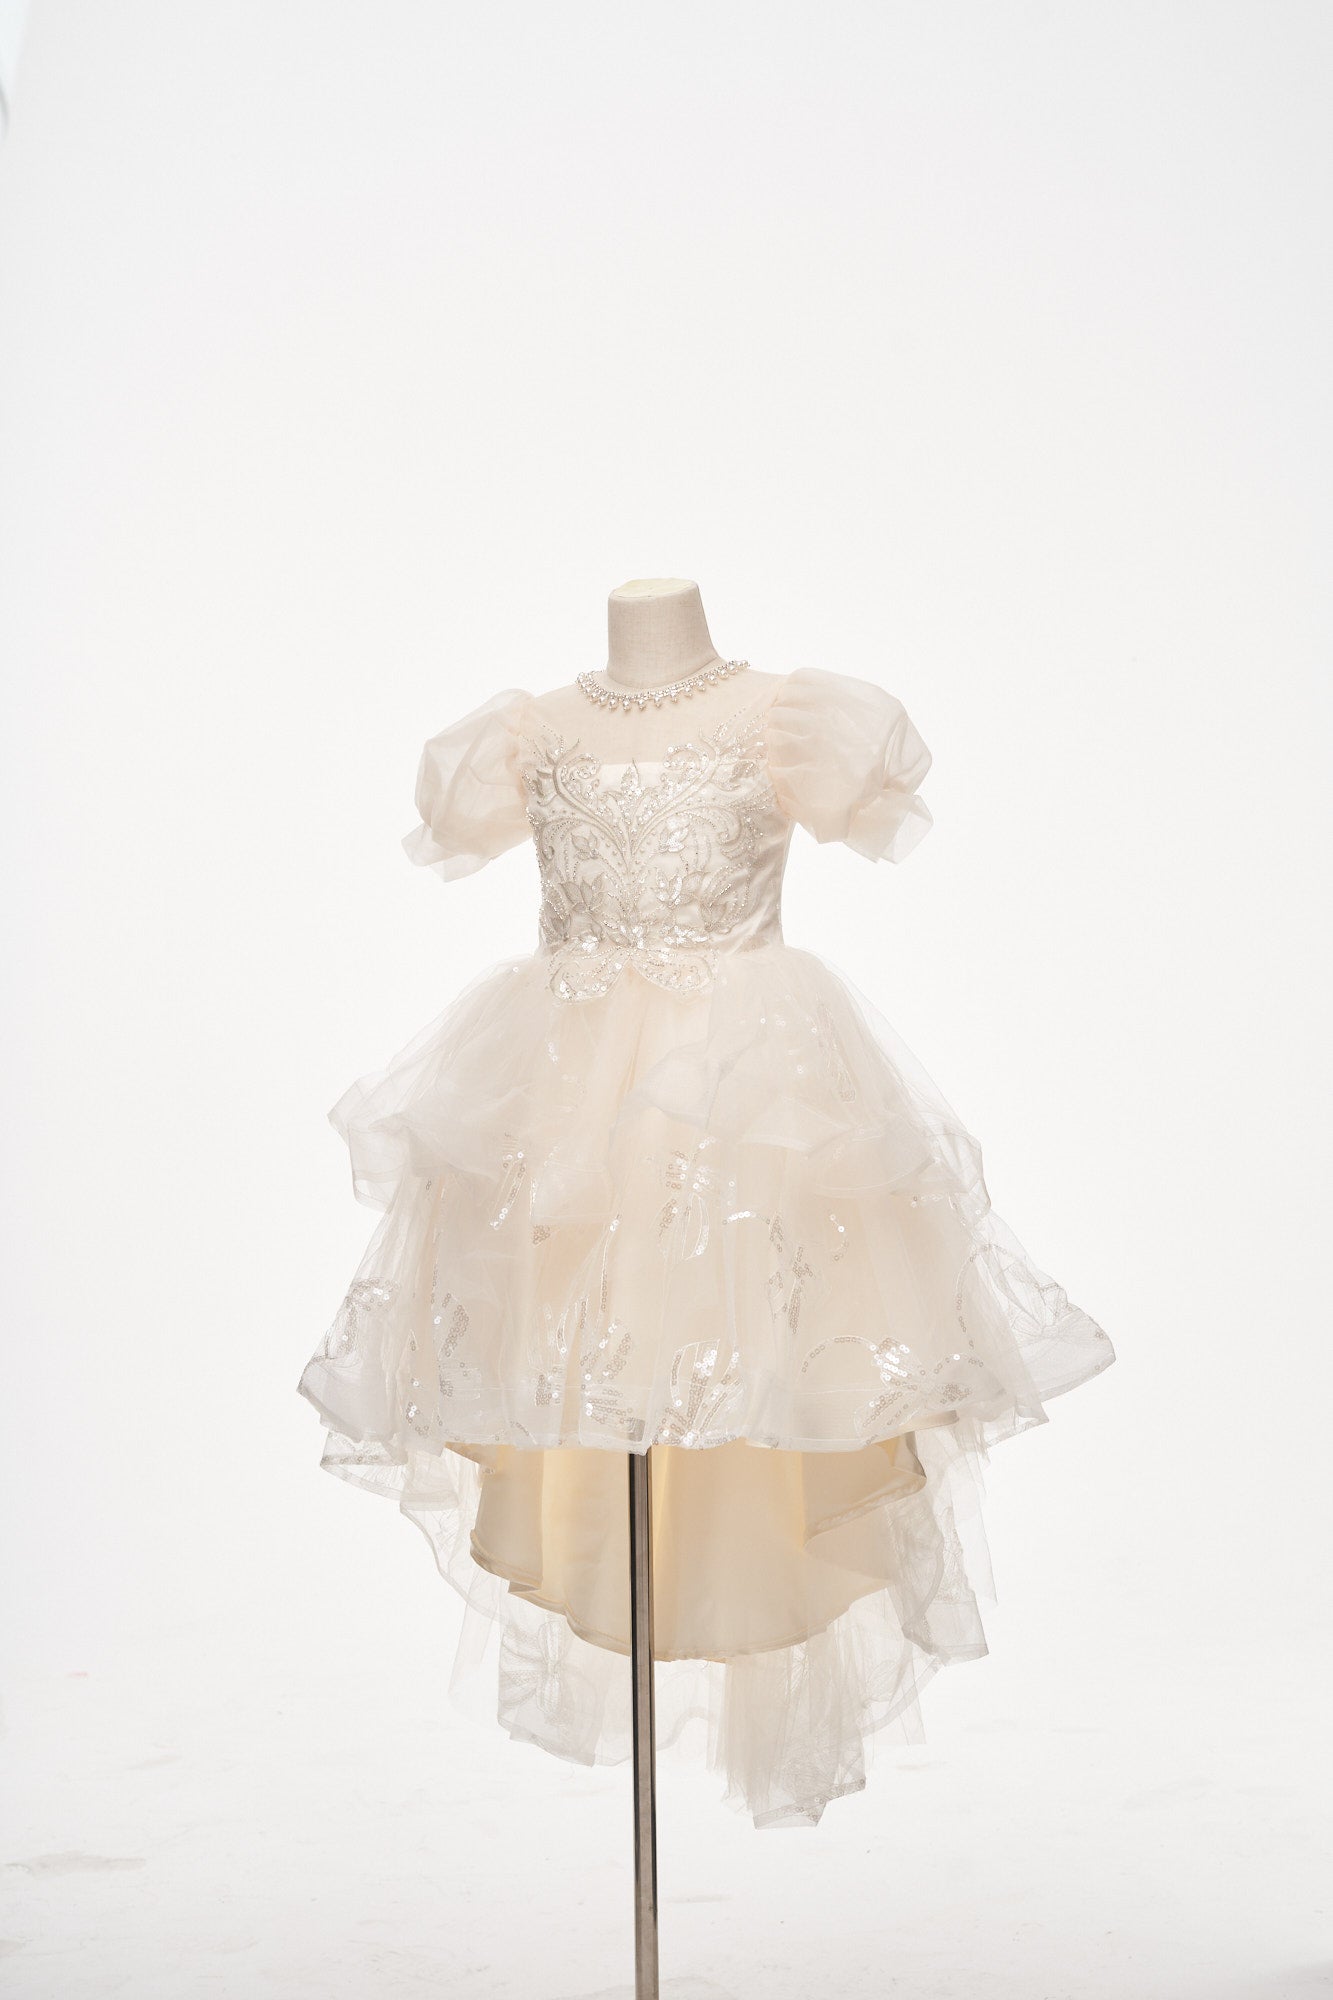 Kate Beige Kids Dress for Photography